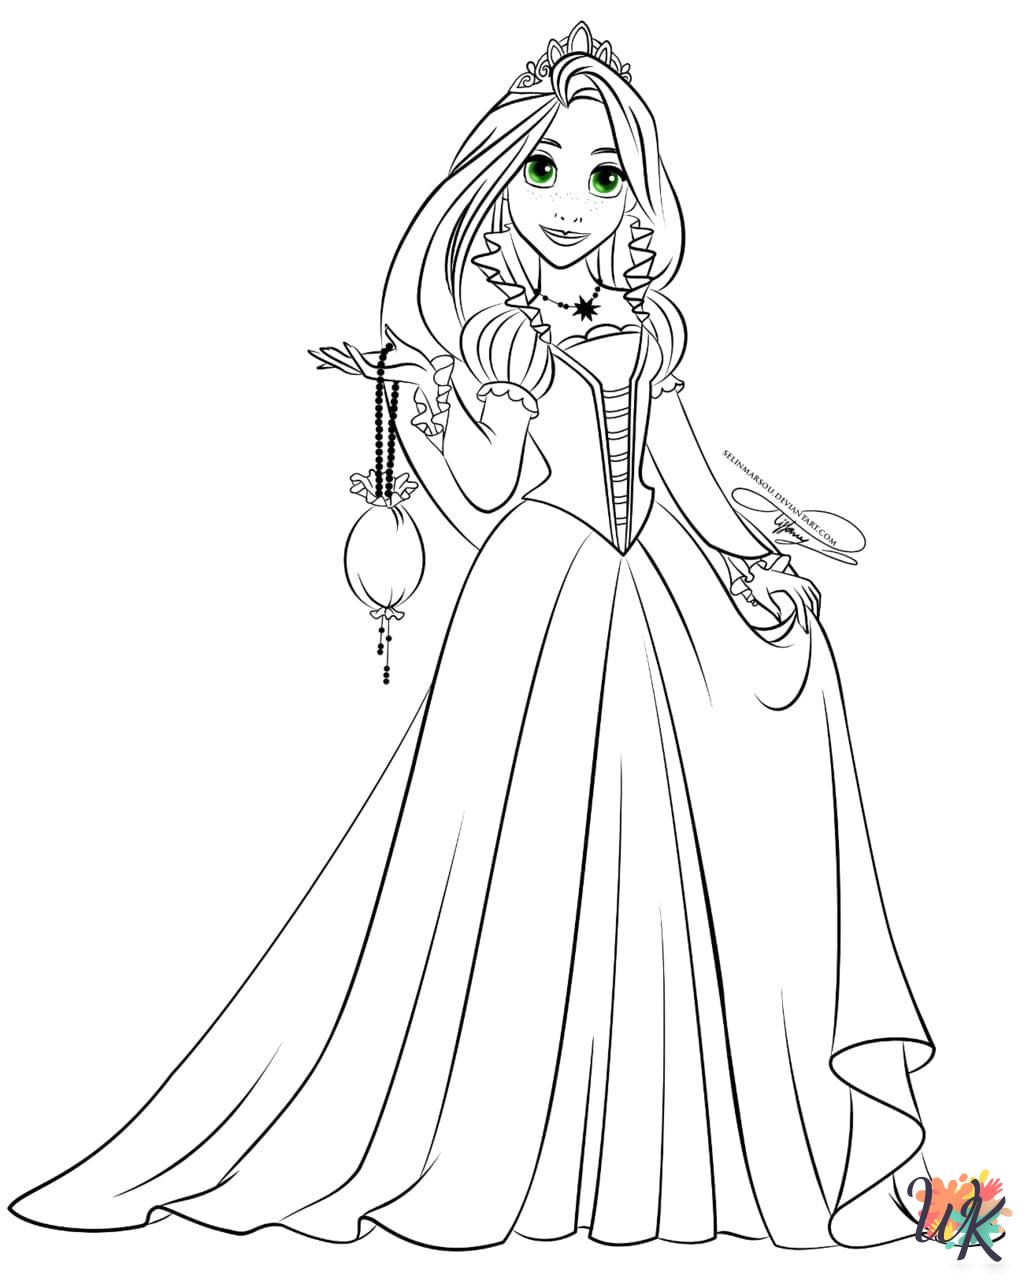 Tangled coloring pages for adults easy